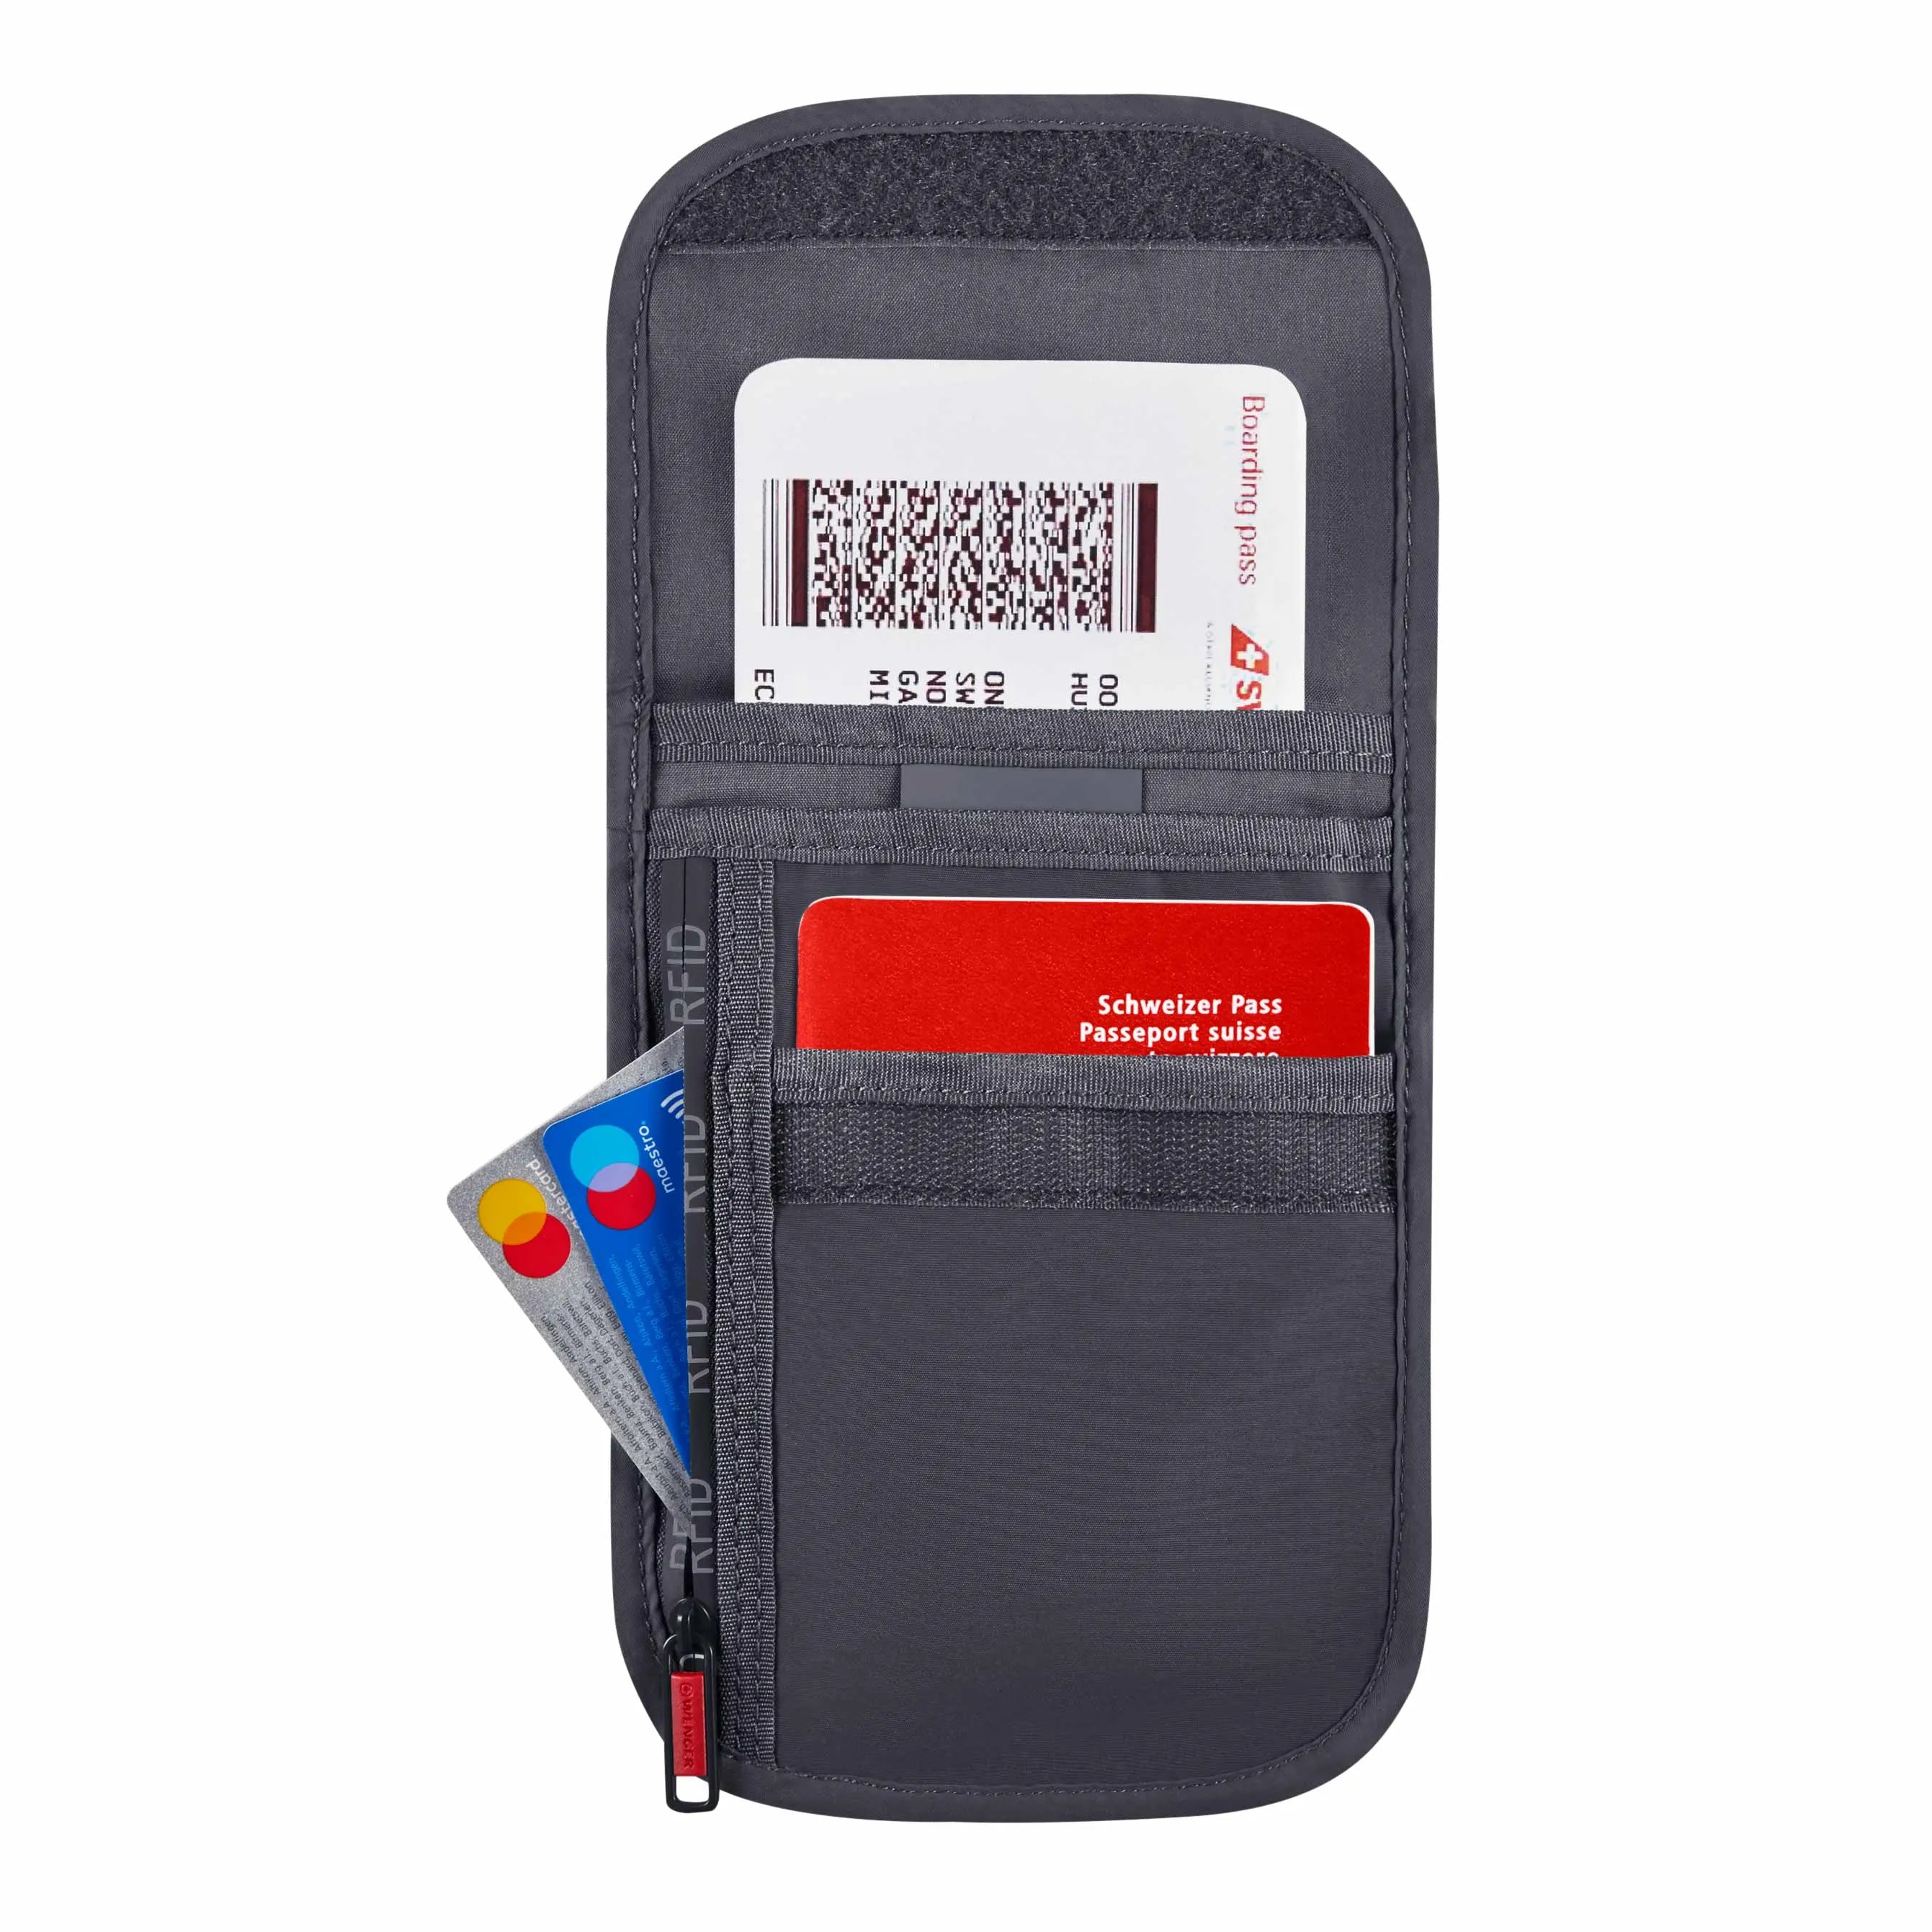 Wenger travel accessories RFID chest pouch for travel documents 19 cm - Grey